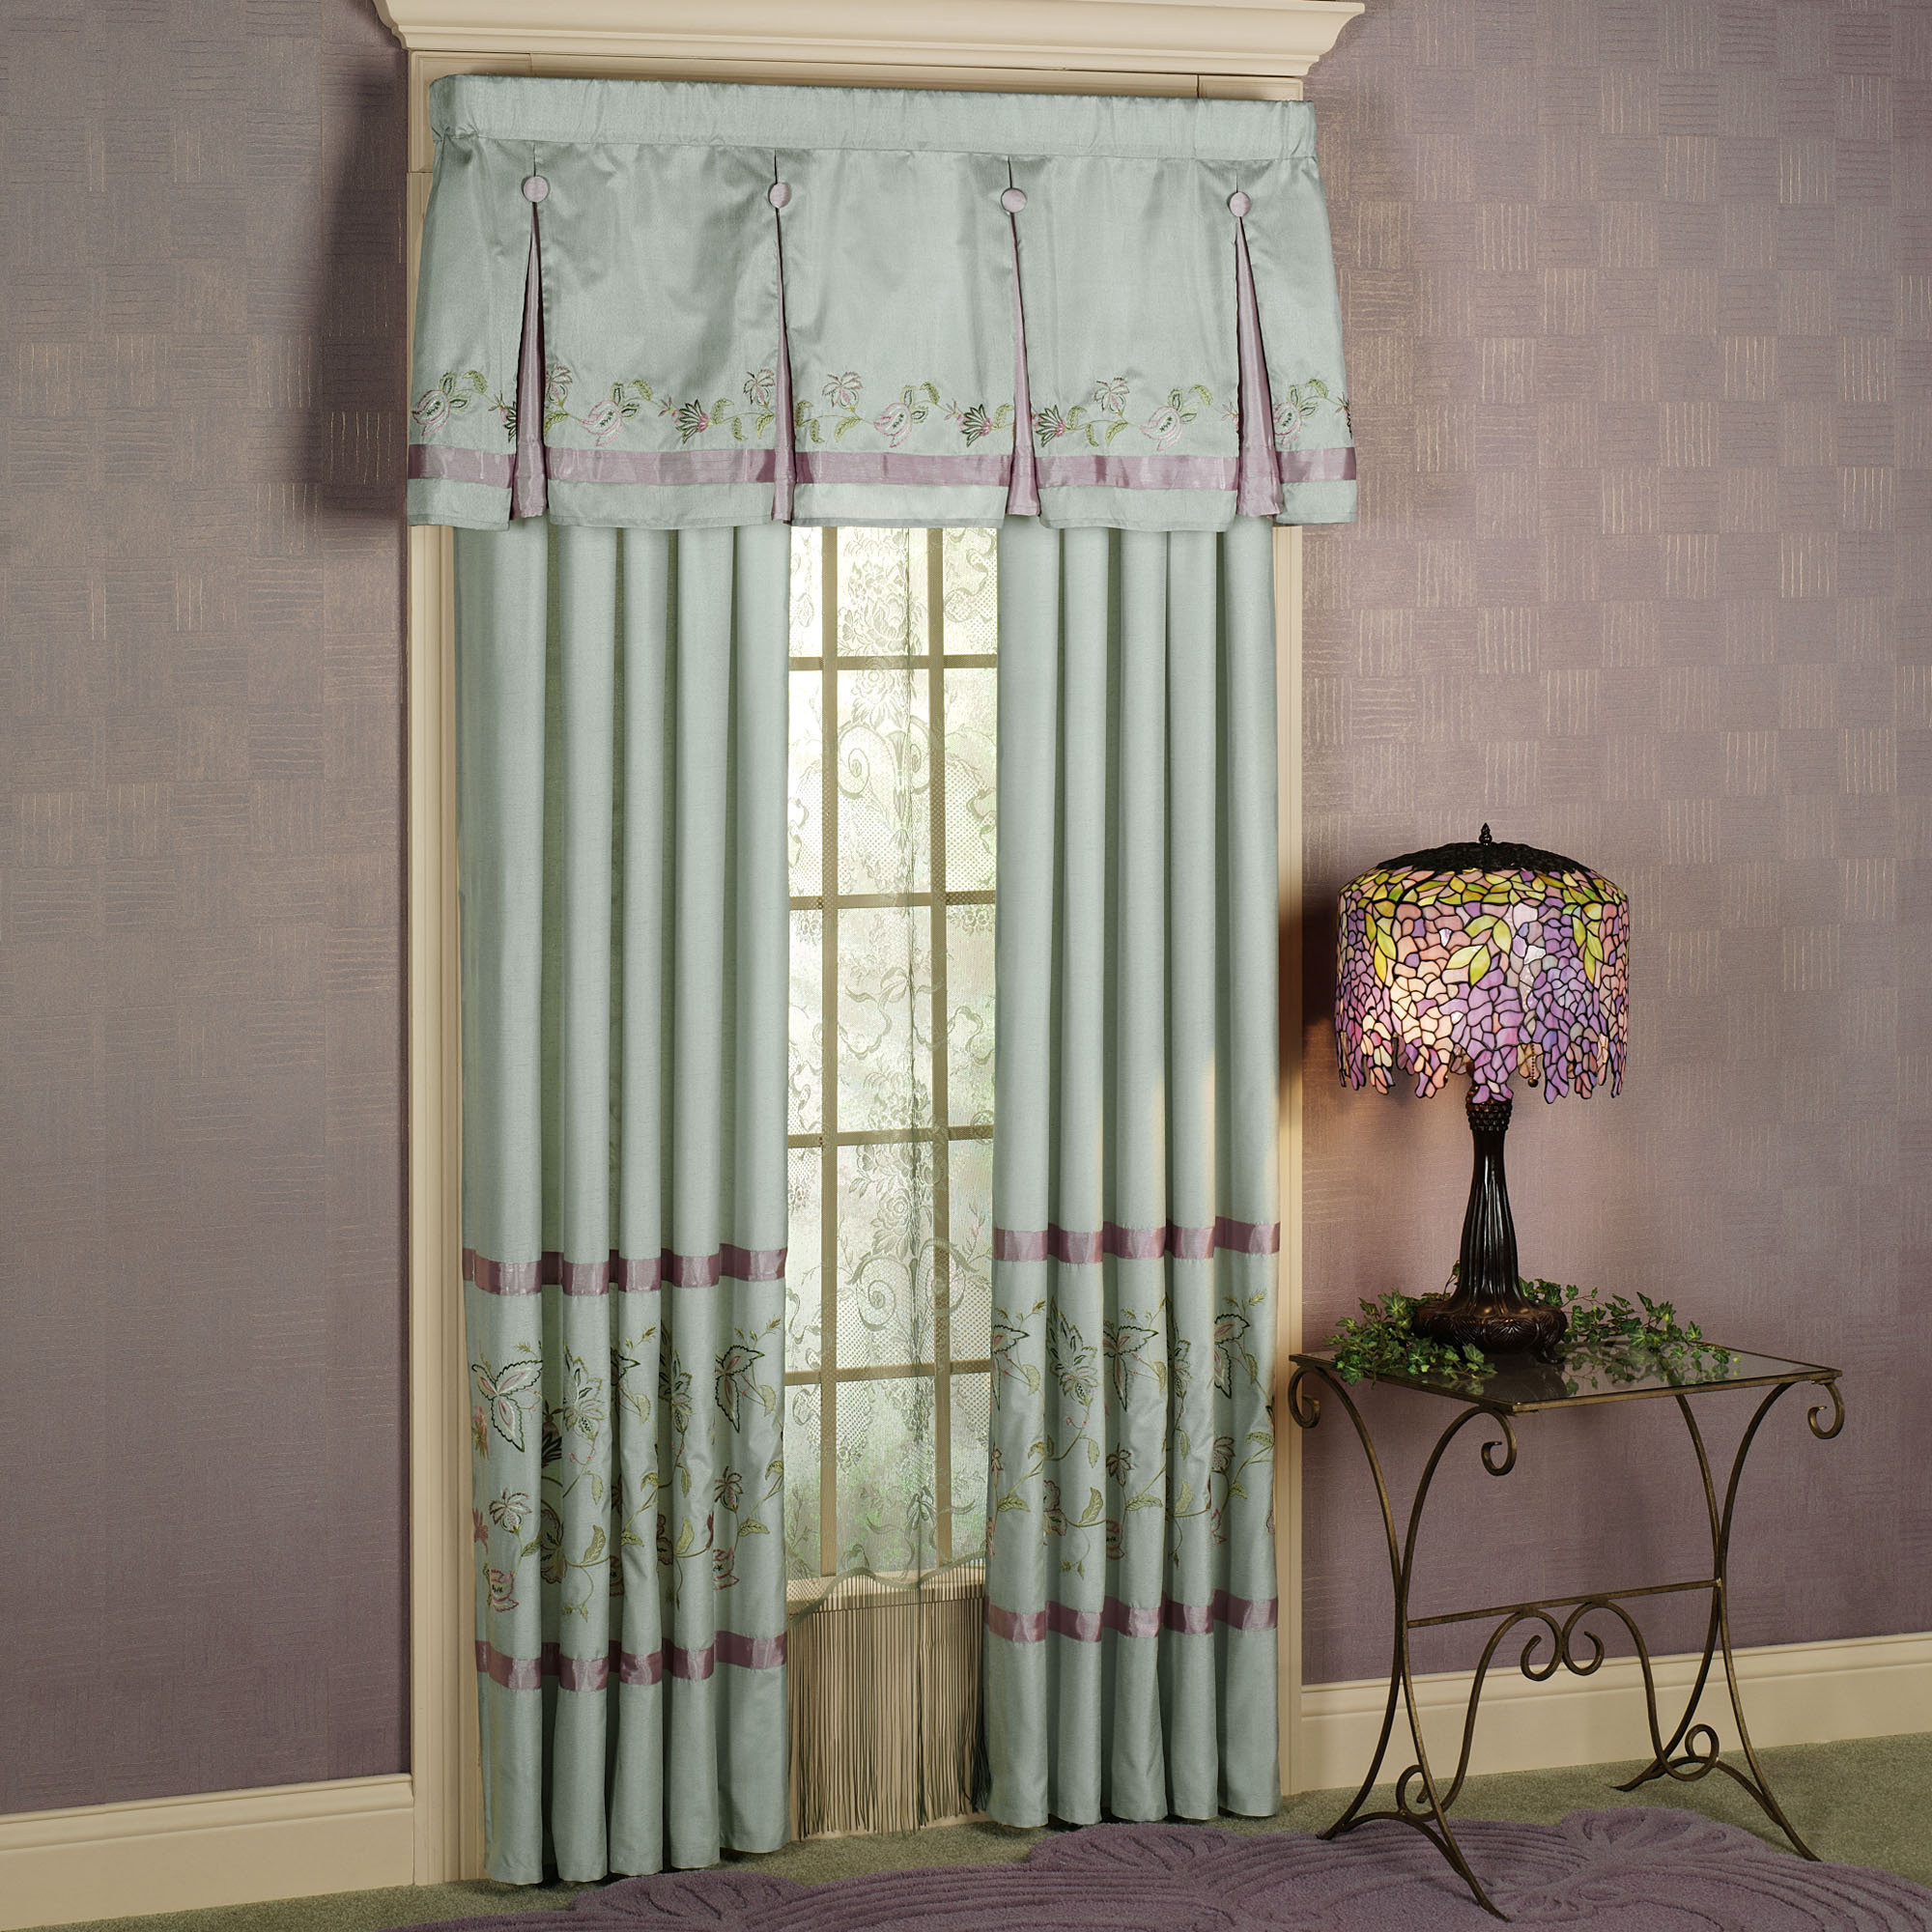 Jcpenney Living Room Curtains Lovely Curtain Elegant Interior Home Decorating Ideas With Of Jcpenney Living Room Curtains 1 